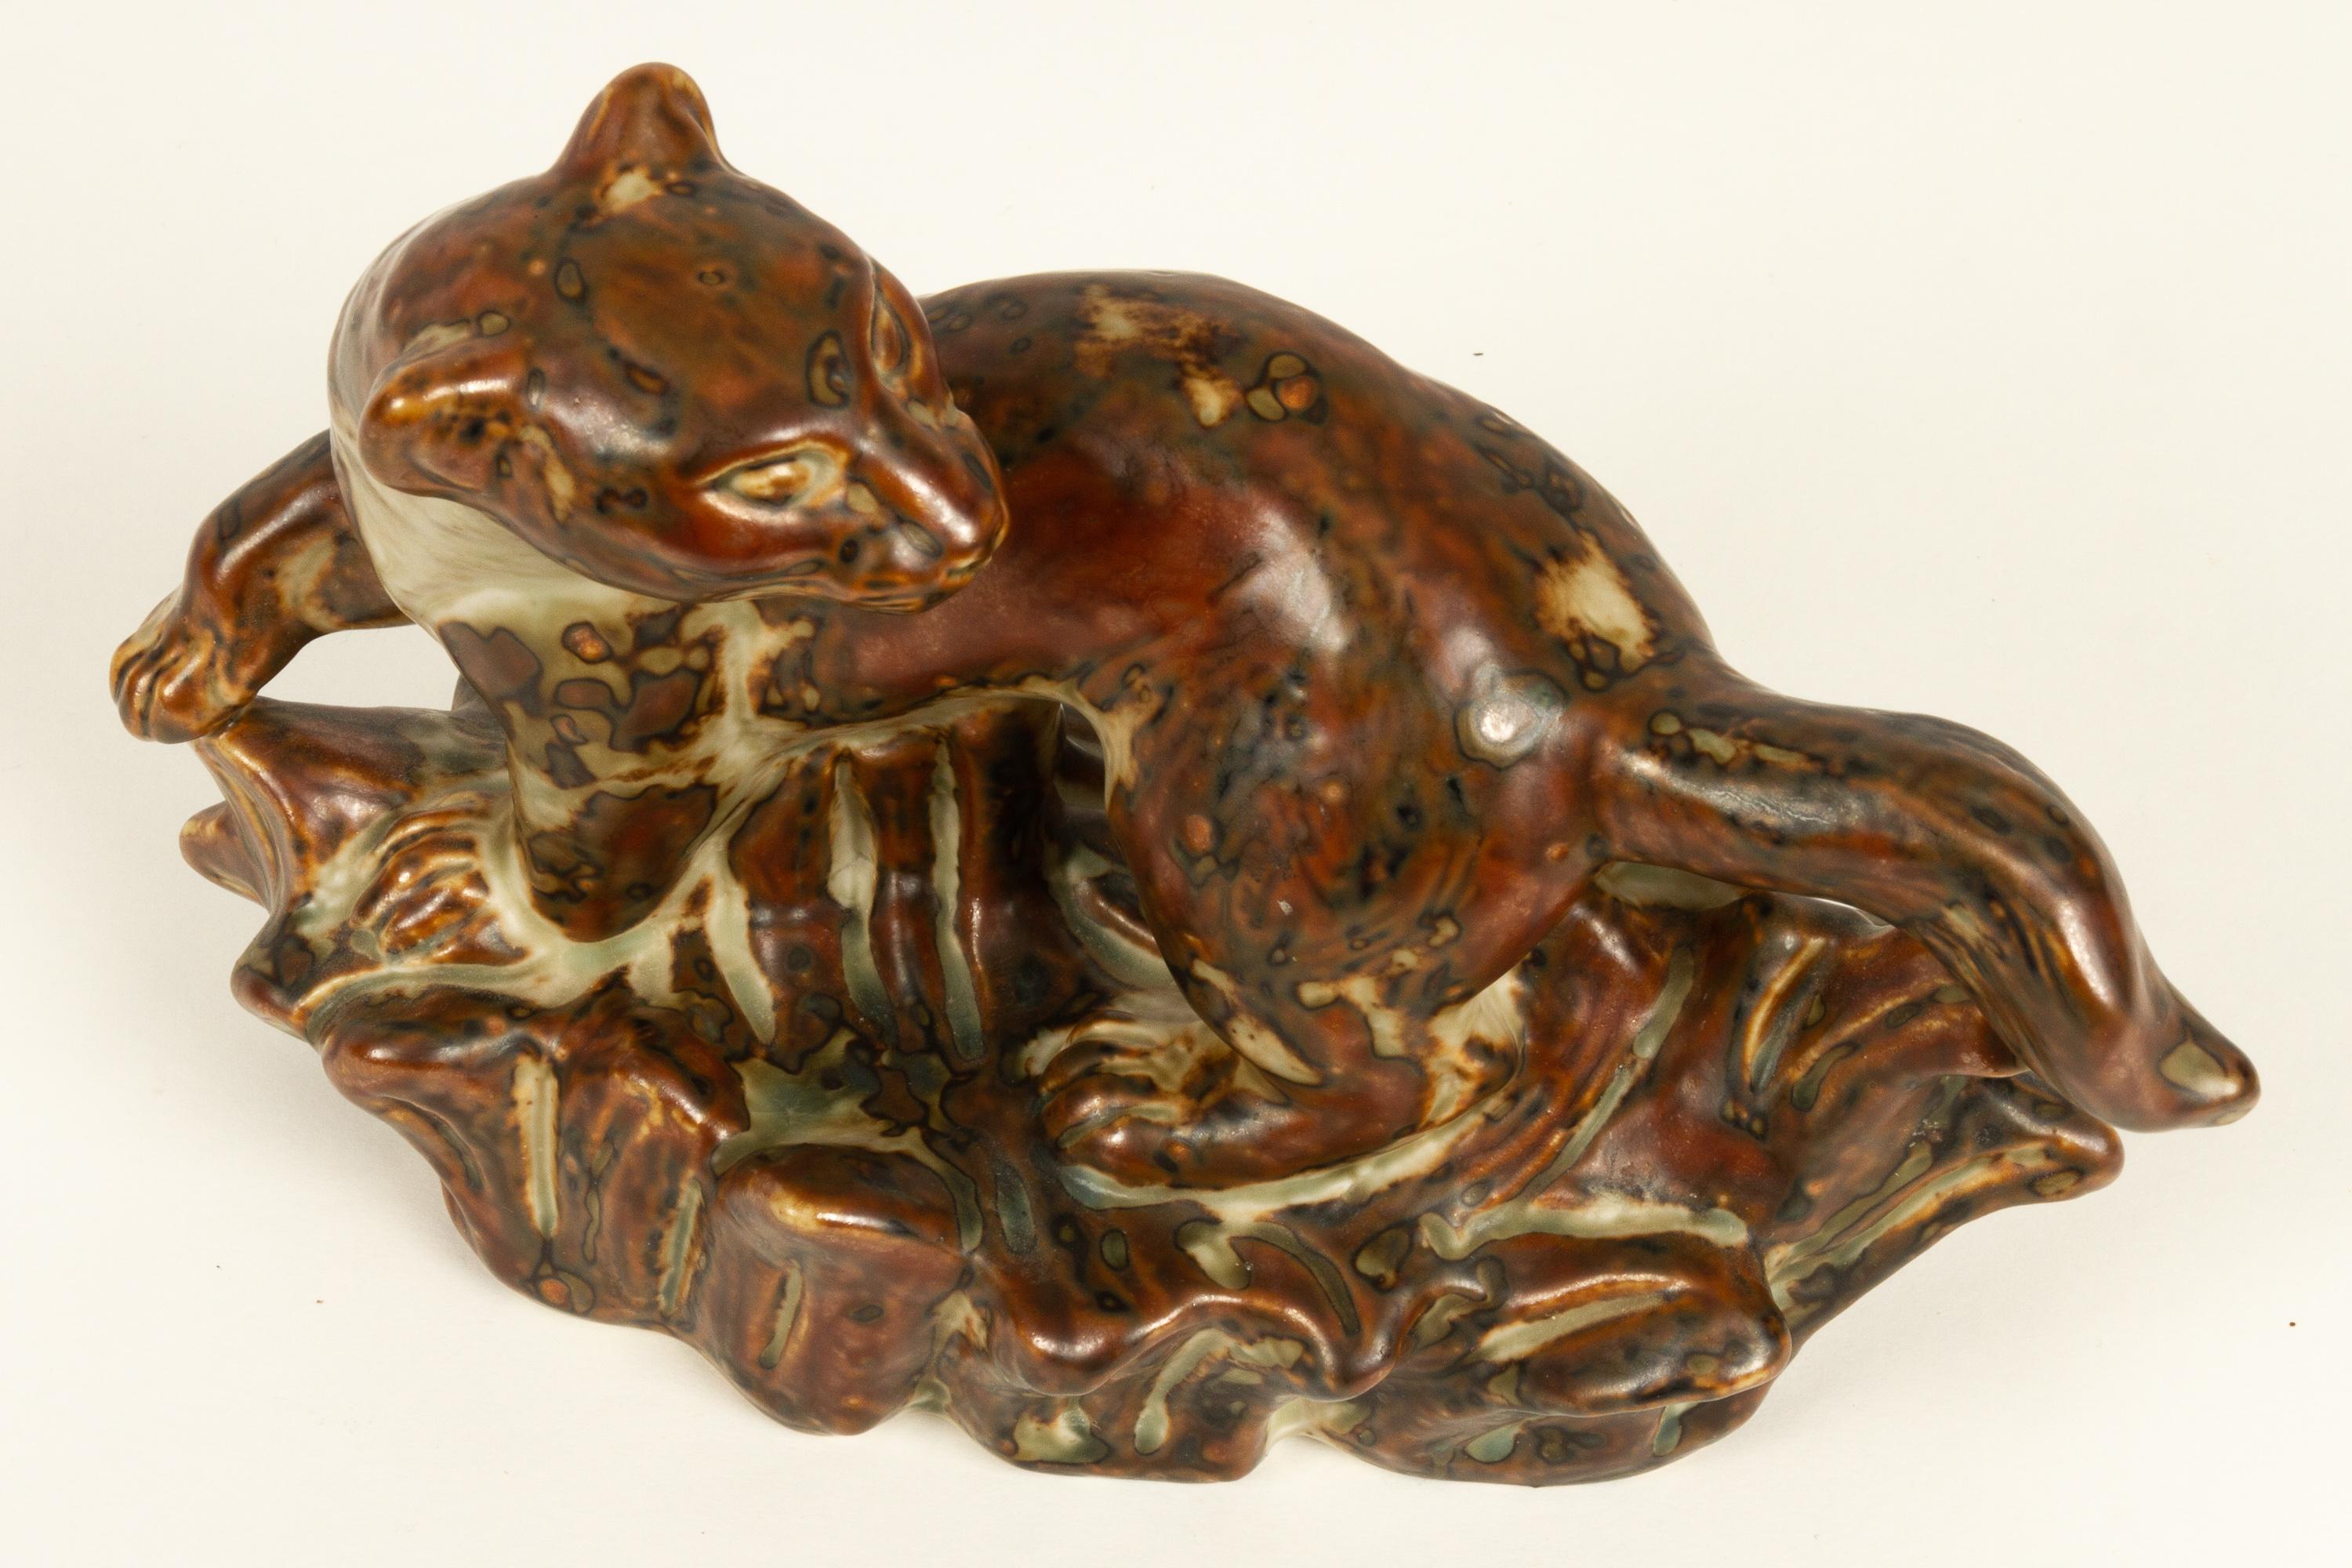 Danish Stoneware Stoat Figurine by Knud Kyhn for Royal Copenhagen, 1970s For Sale 1